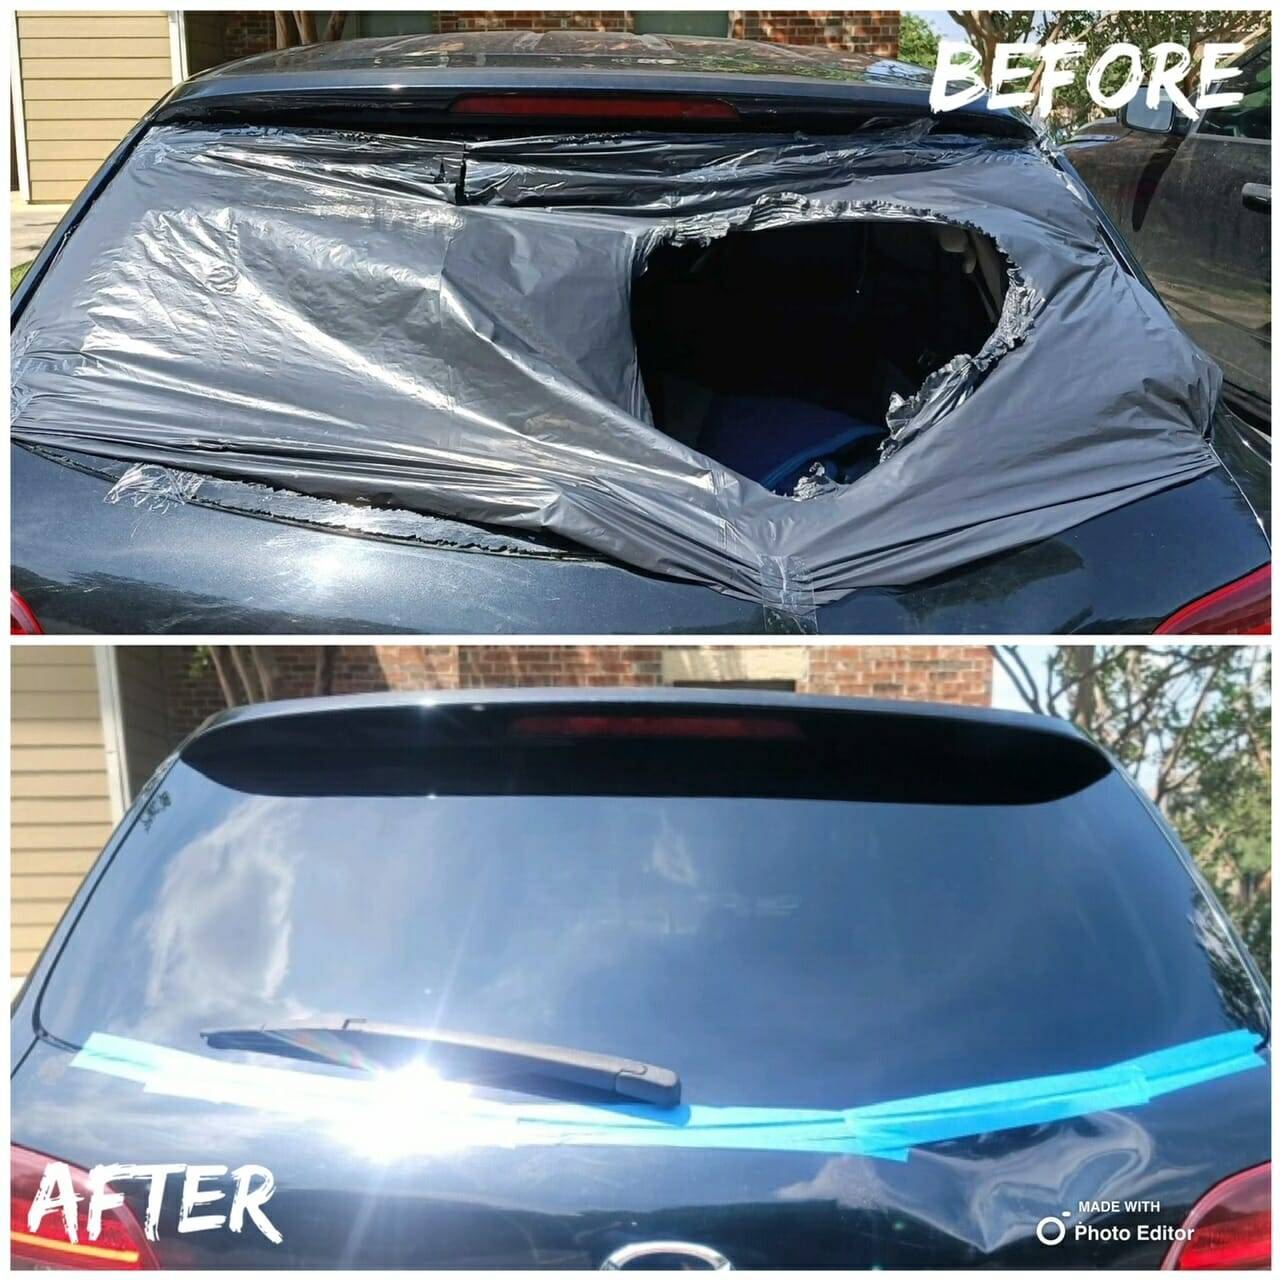 This before and after image captures the transformation of an SUV's rear windshield in Helotes, Texas. The top half displays a damaged windshield, smashed and covered by a large black plastic trash bag with a significant hole torn in it. The bottom half showcases the SUV after the repair, featuring a new, clear, and intact back glass installed.